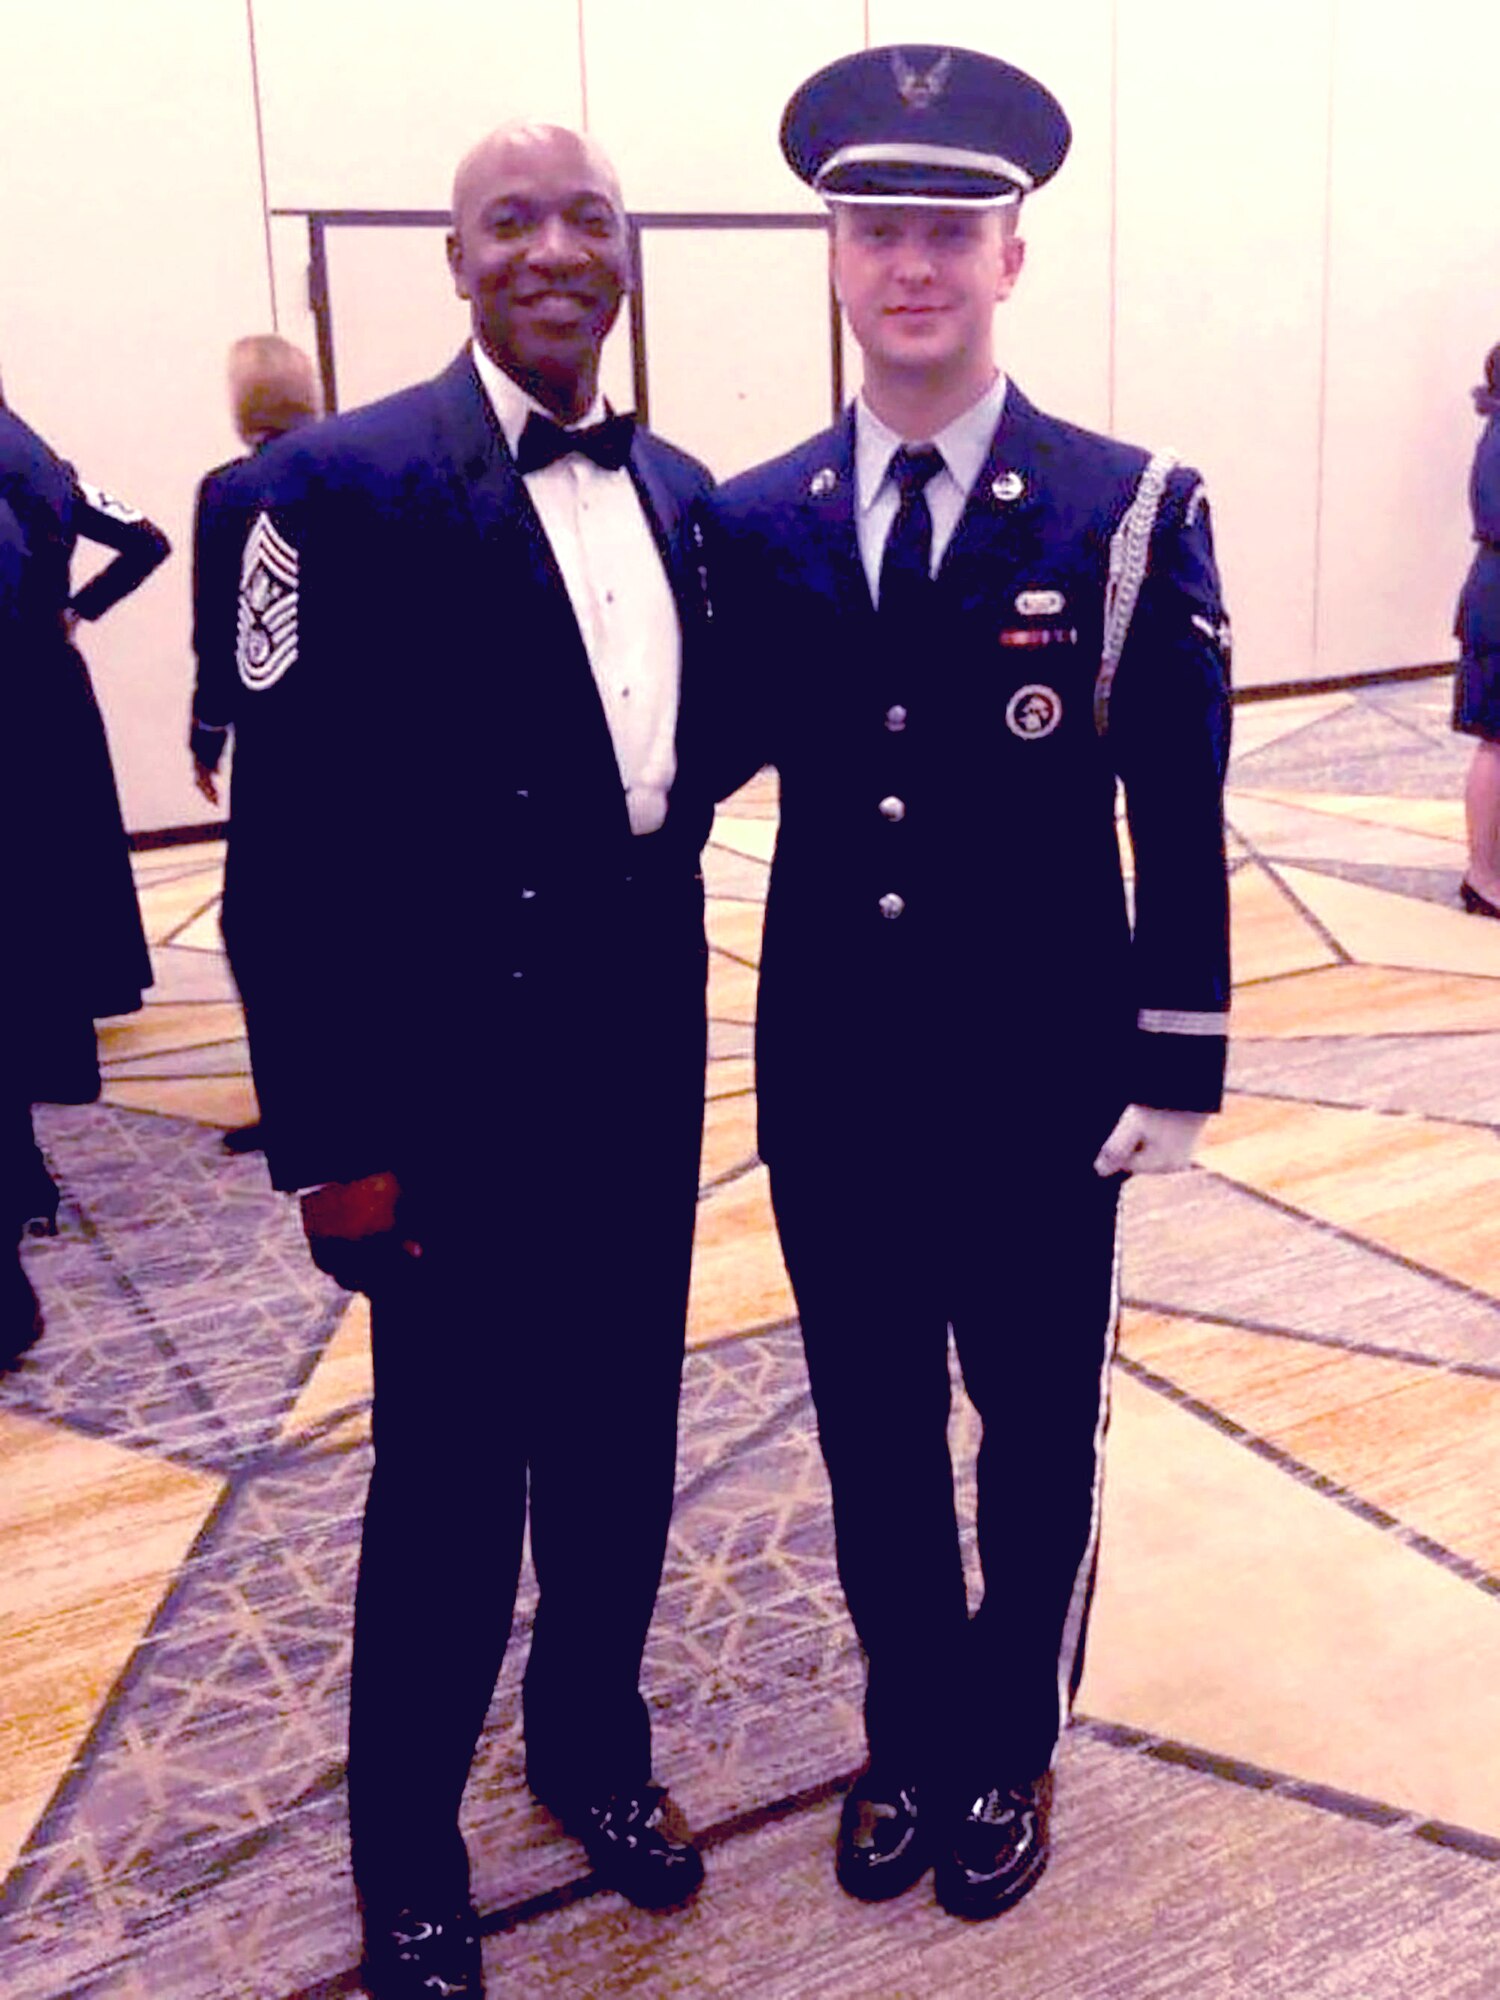 A1C Schneck posing with Chief Master Sergeant of the Air Force